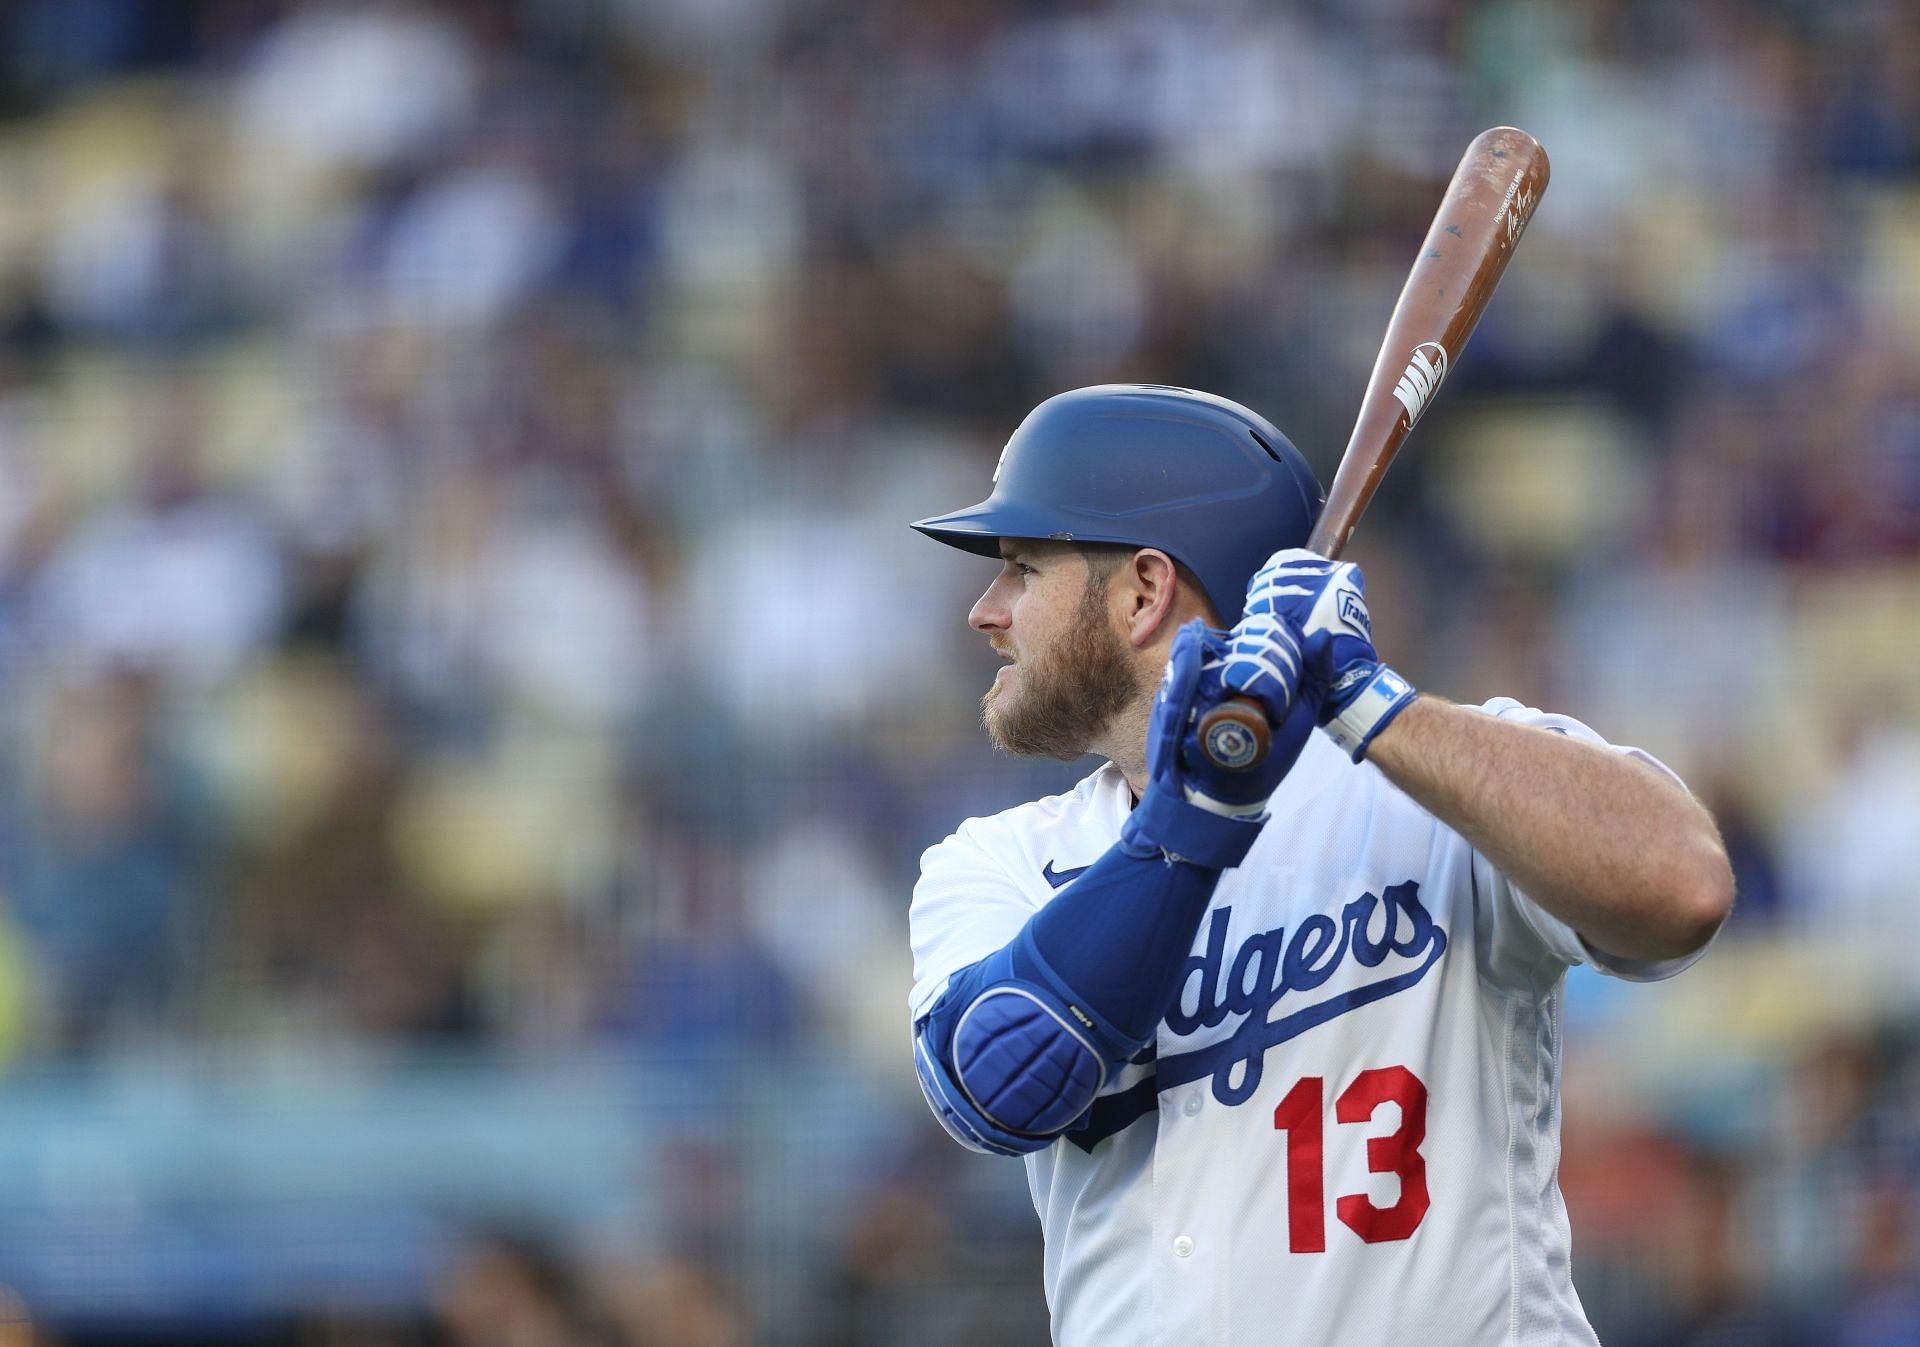 Los Angeles Dodgers' Max Muncy apologizes after quick reaction to 'absurd'  amount of fan mail